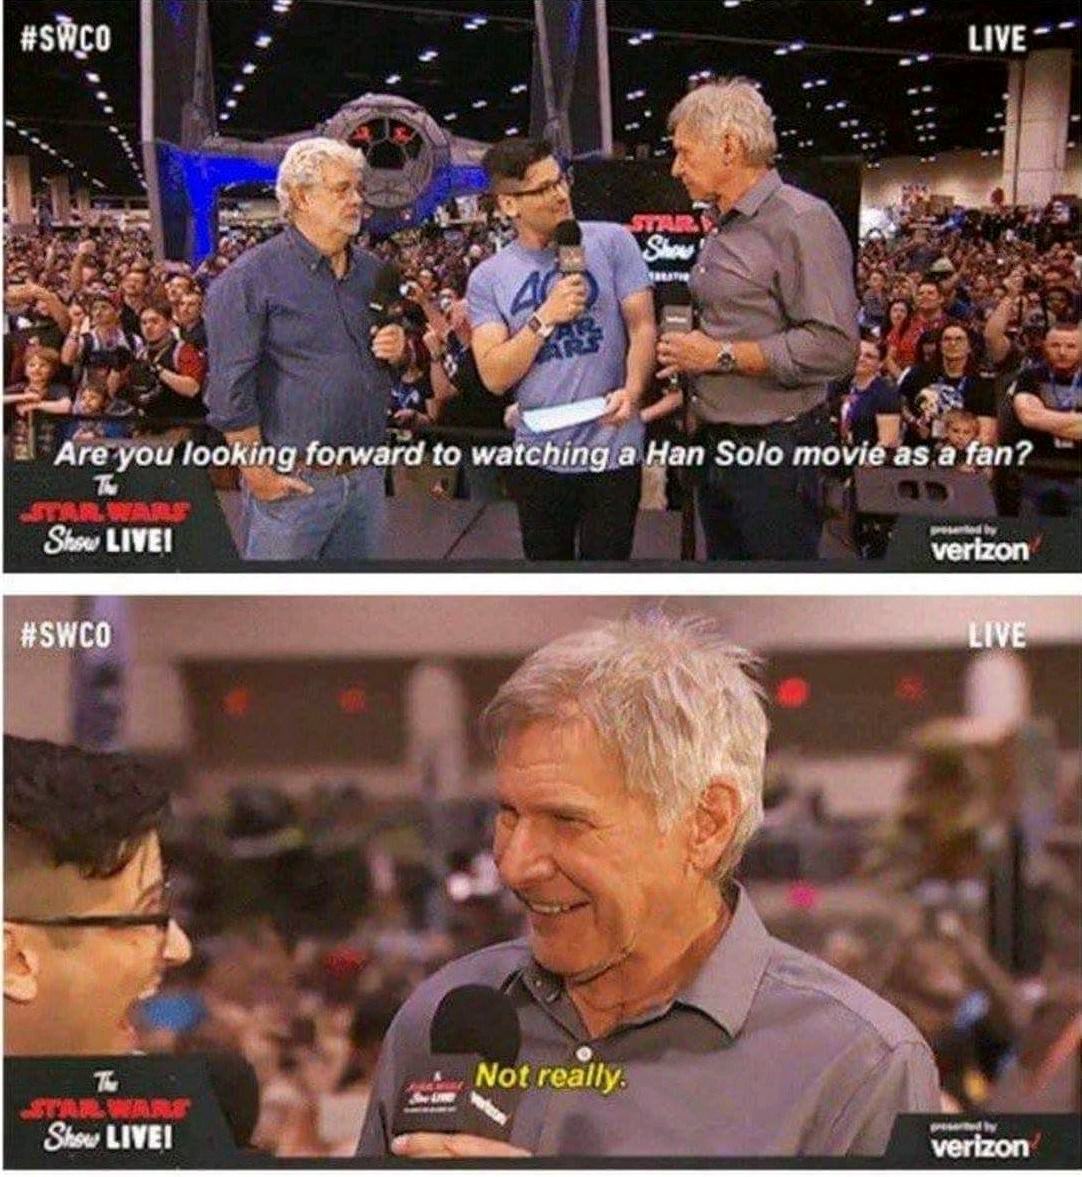 harrison ford meme - Live Show Are you looking forward to watching a Han Solo movie as a fan? Show Livei verizon Live 7 Not really Show Livei pred verizon